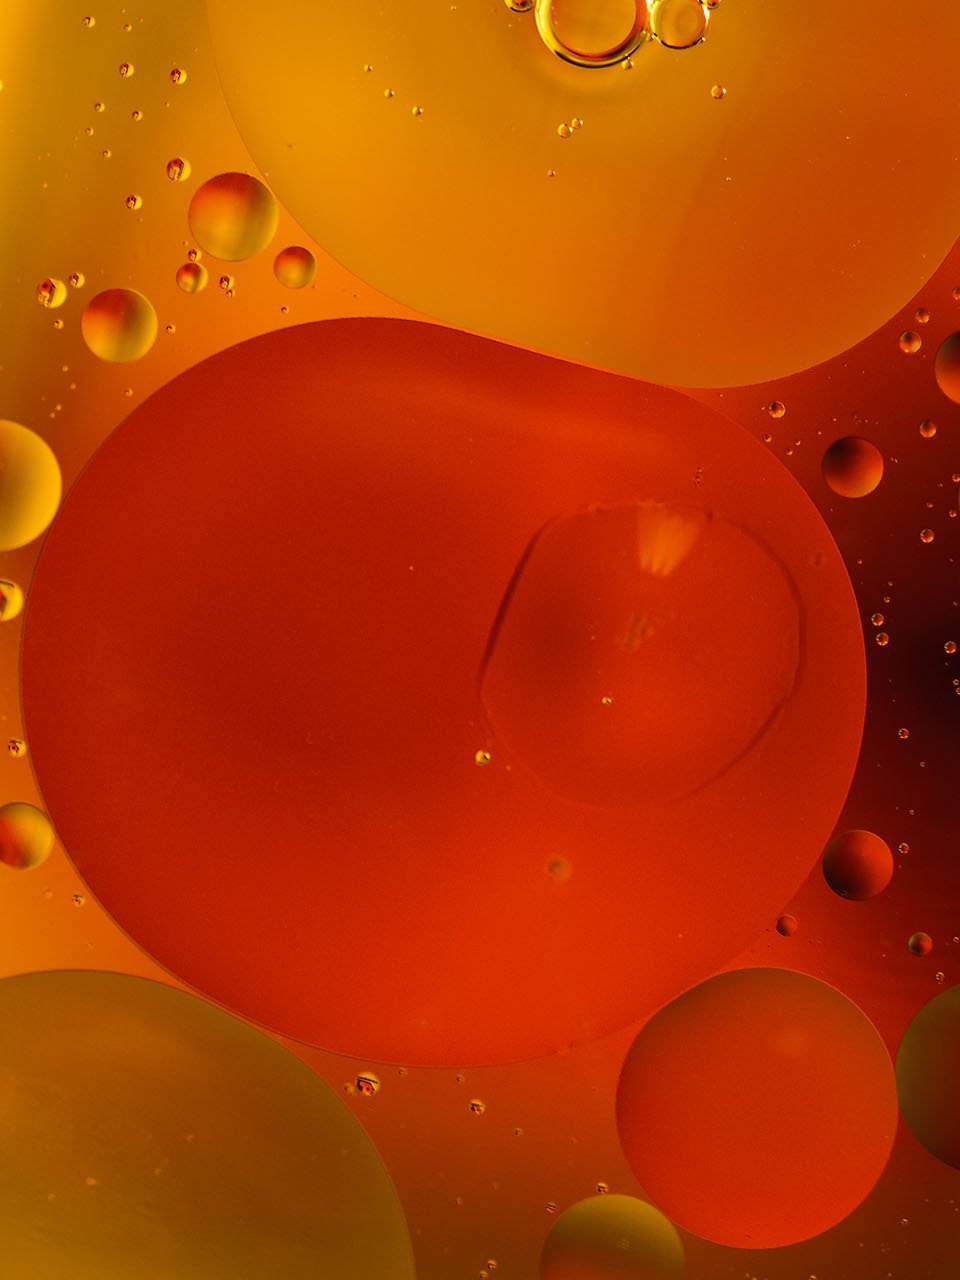 Close-ups of air bubbles in the lubricating oil